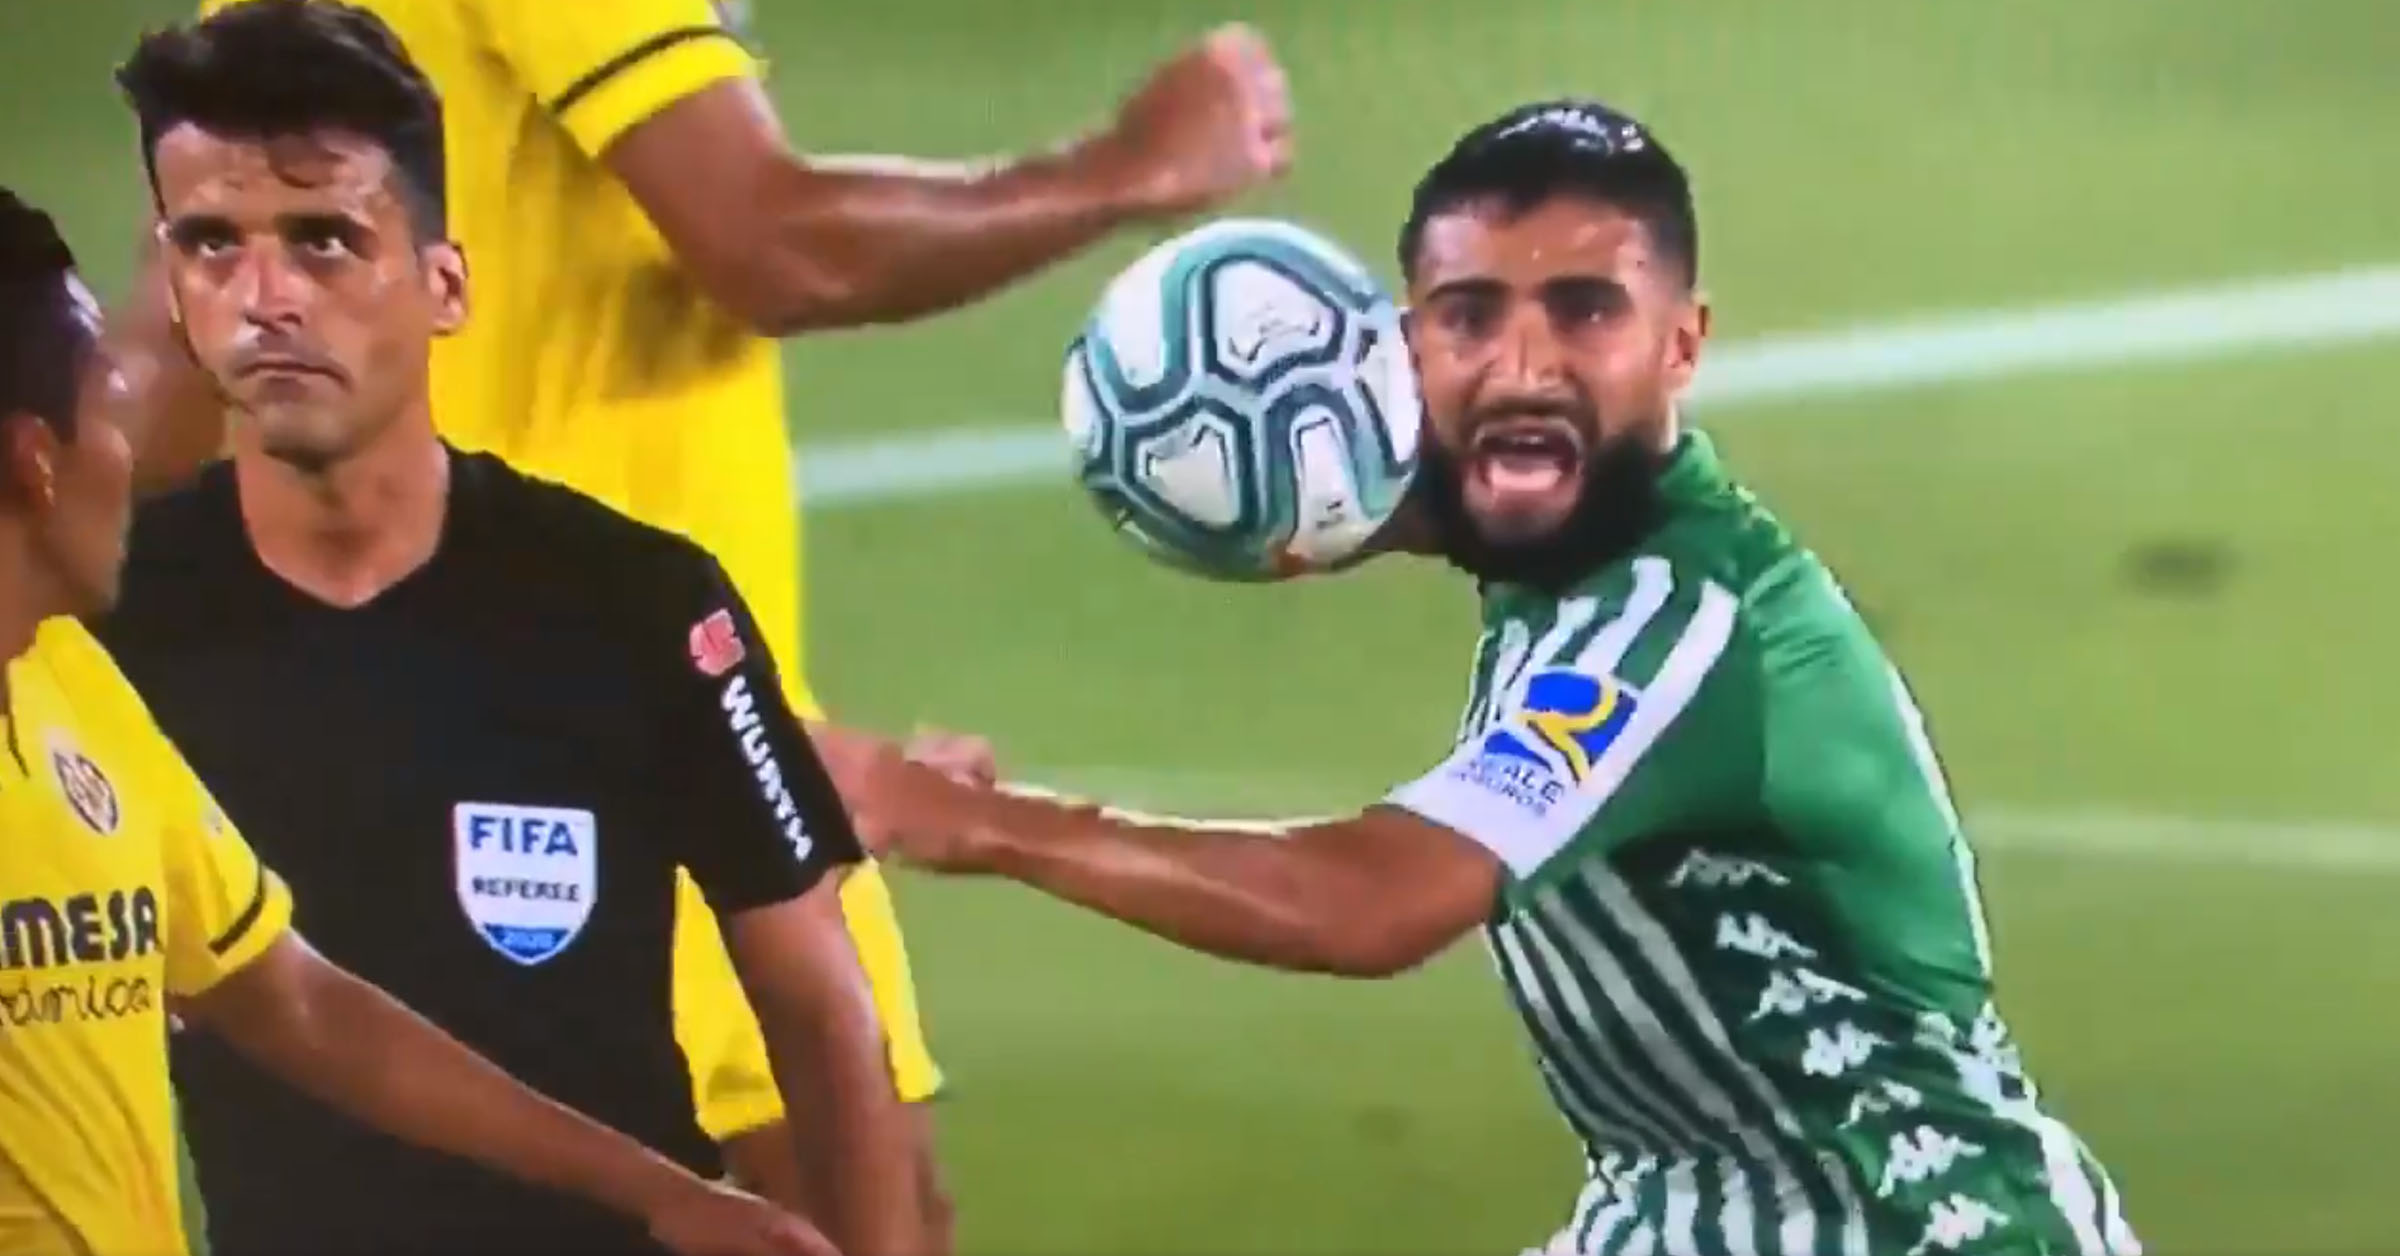 Indsigt Mathis Virkelig WATCH: Nabil Fekir Gets 2 Yellow Cards In 2 Minutes After Throwing The Ball  At The Referee